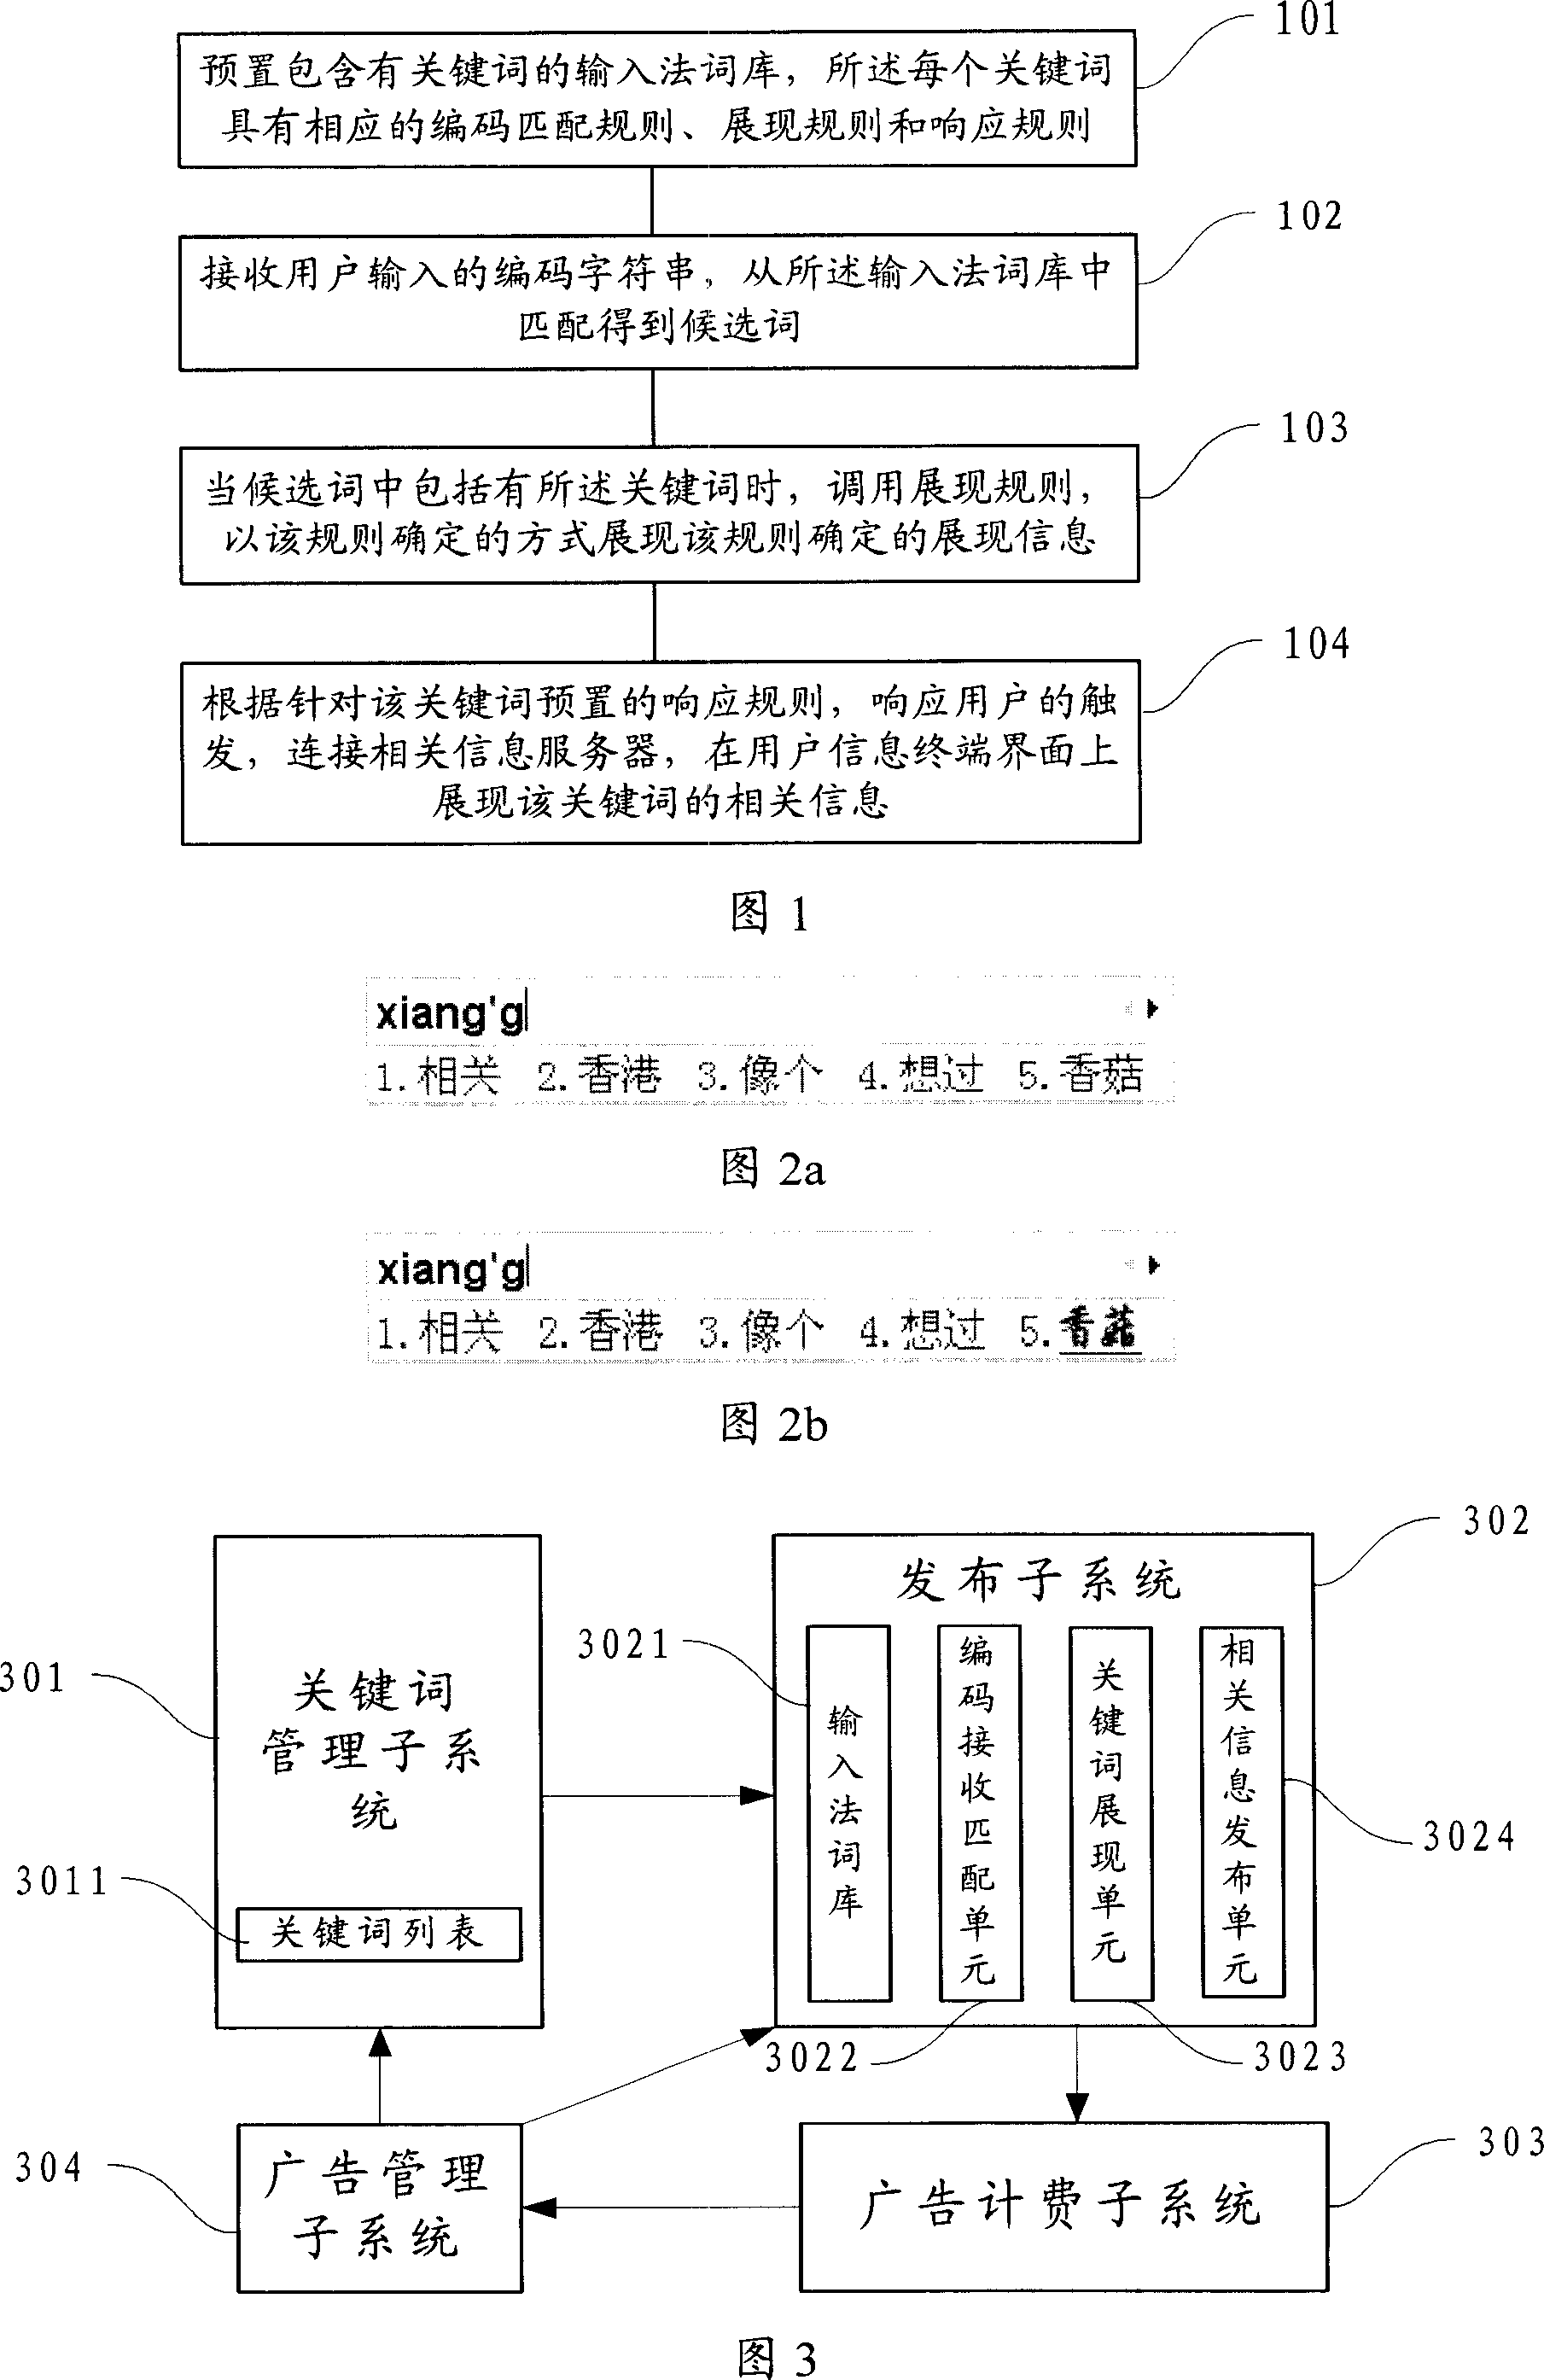 Method and system for issuing relative information of key characters of internet